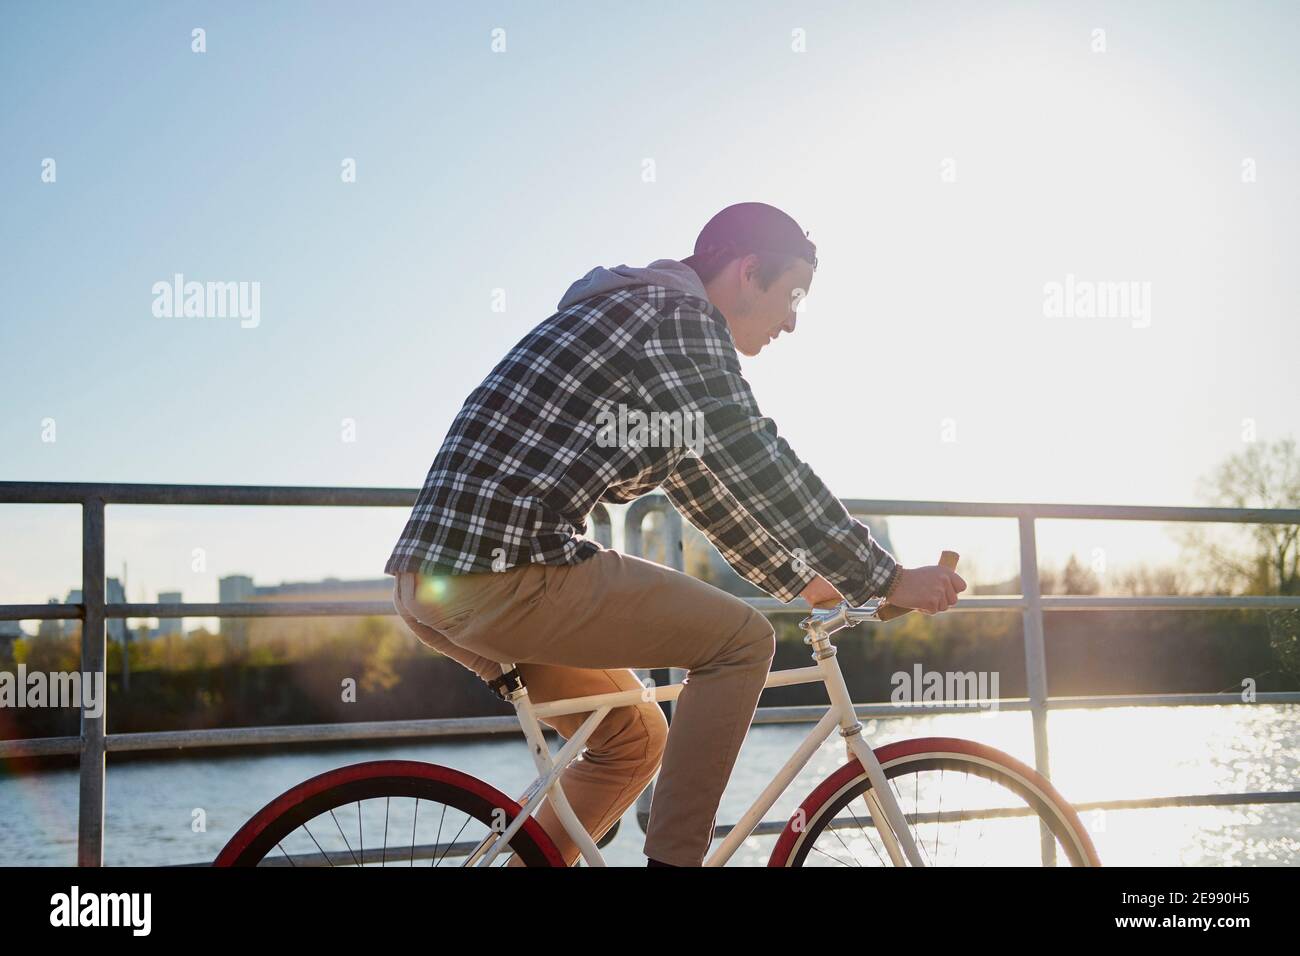 Youthful man on fixed gear bike cycling around city, Montreal, Quebec, Canada Stock Photo